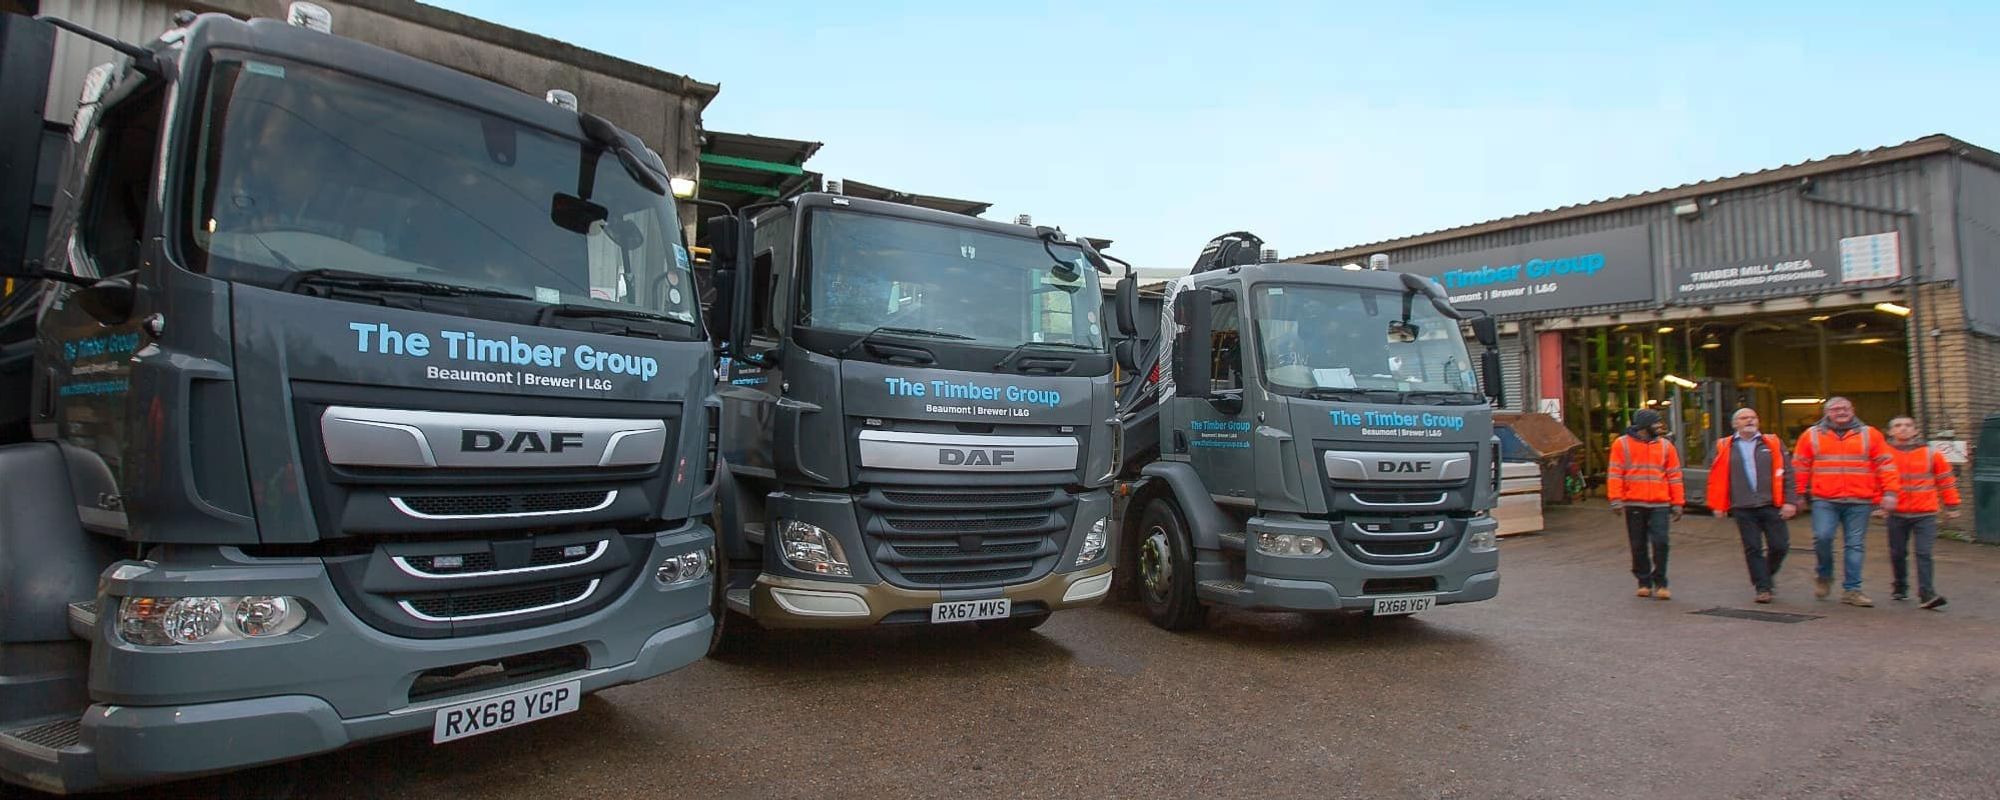 The Timber Group Lorries